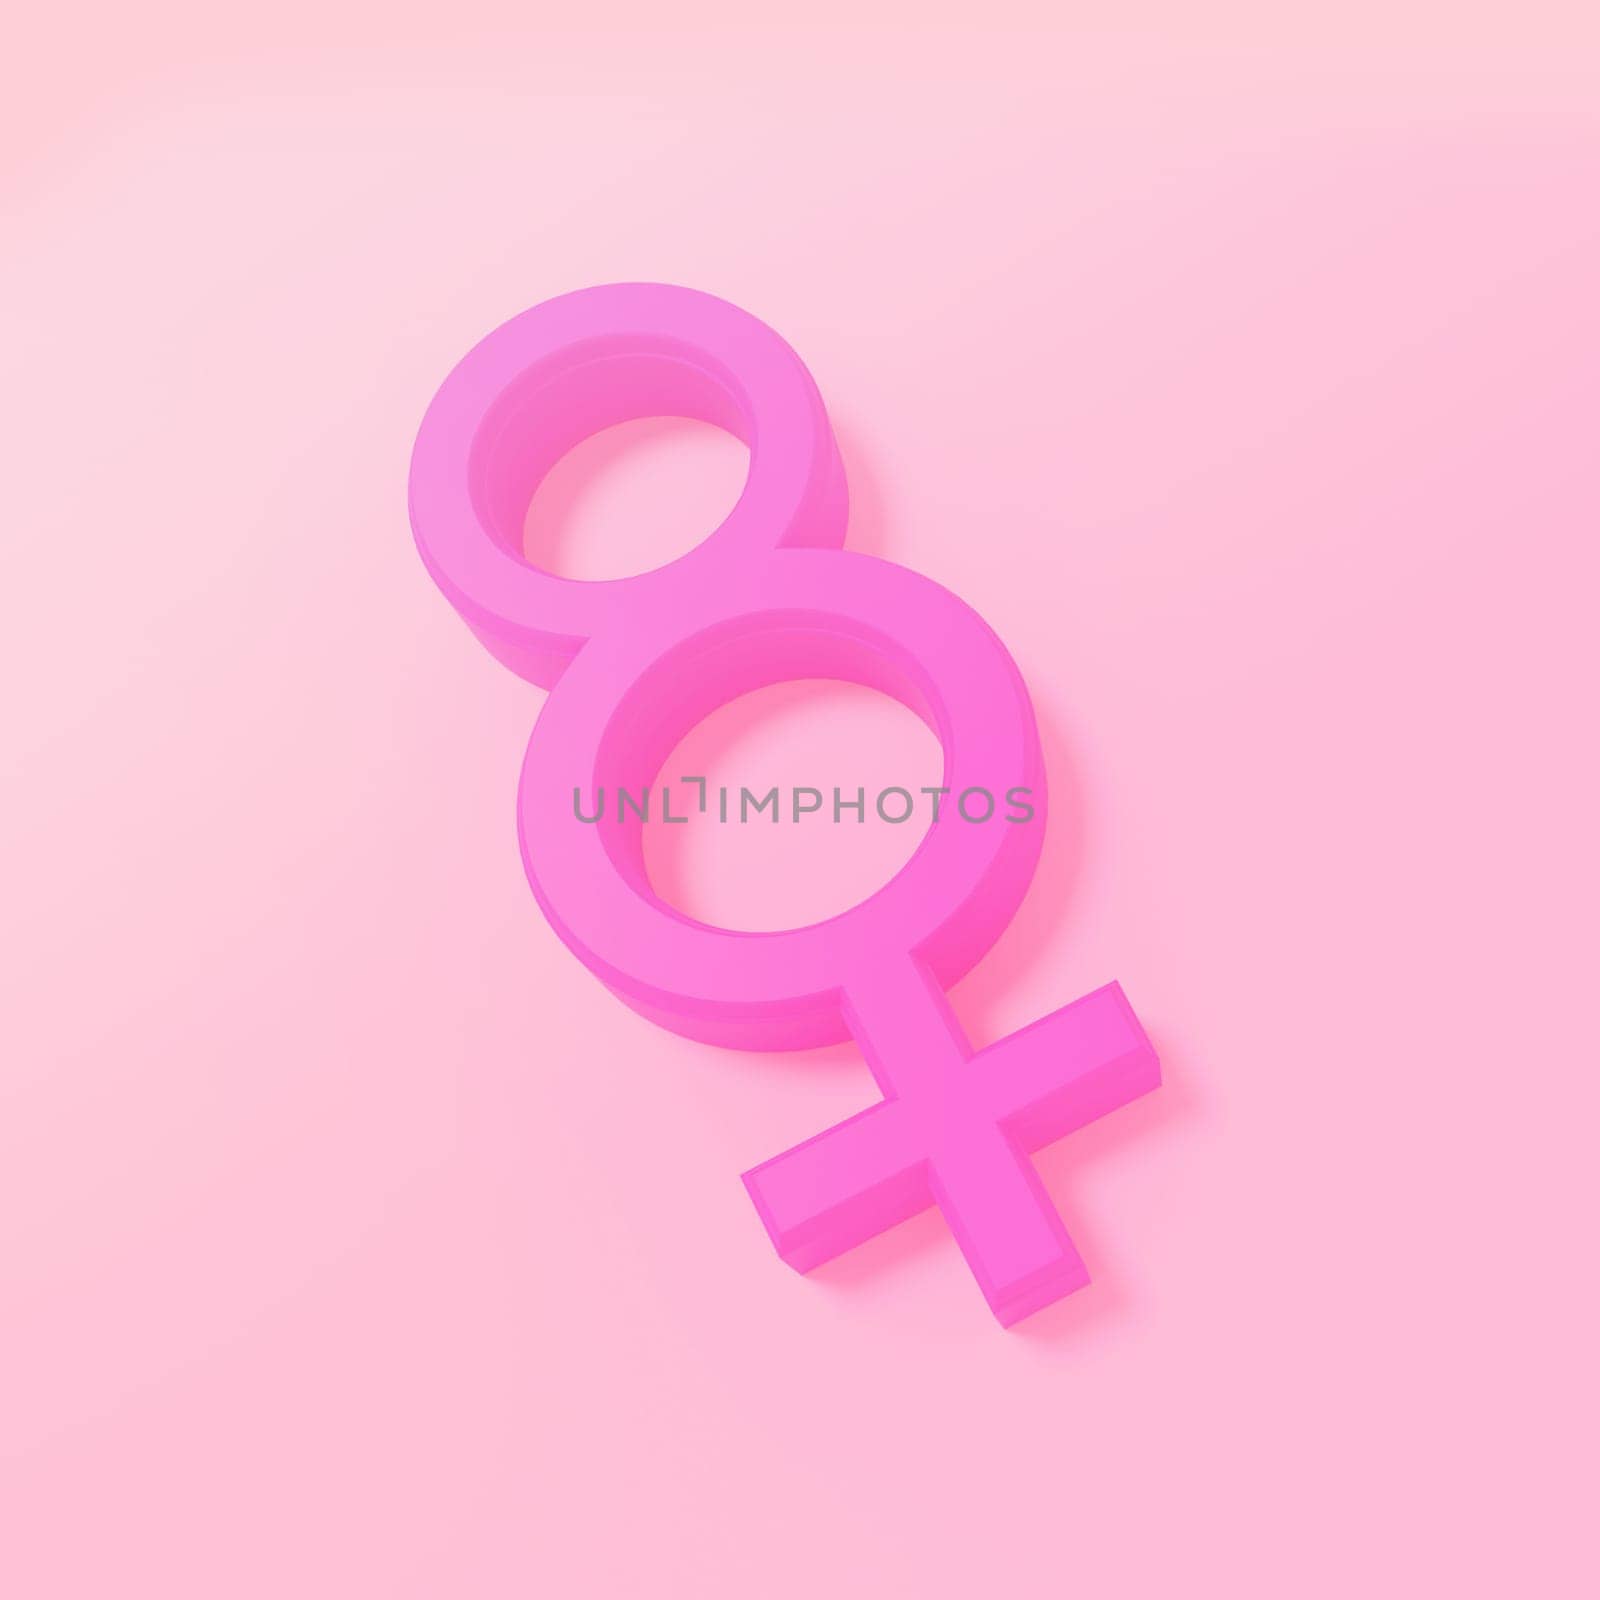 Celebration of women's day. Venus sign and eight on a pink background. by ImagesRouges